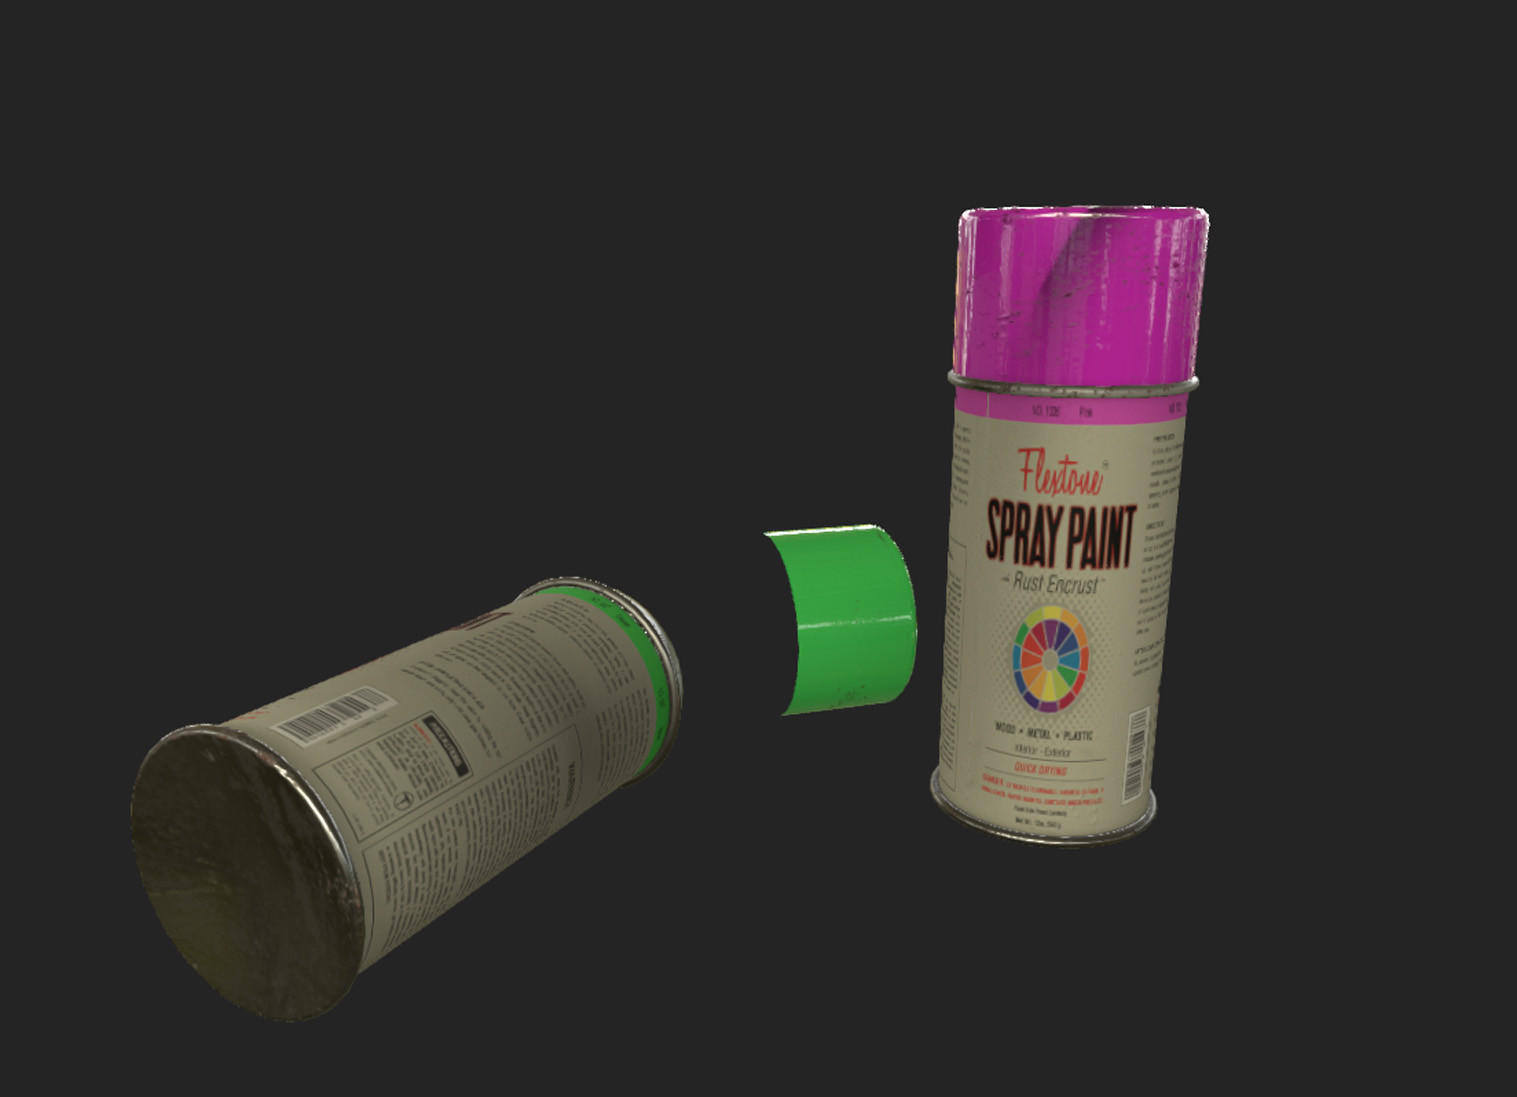 Close ups of the spray cans